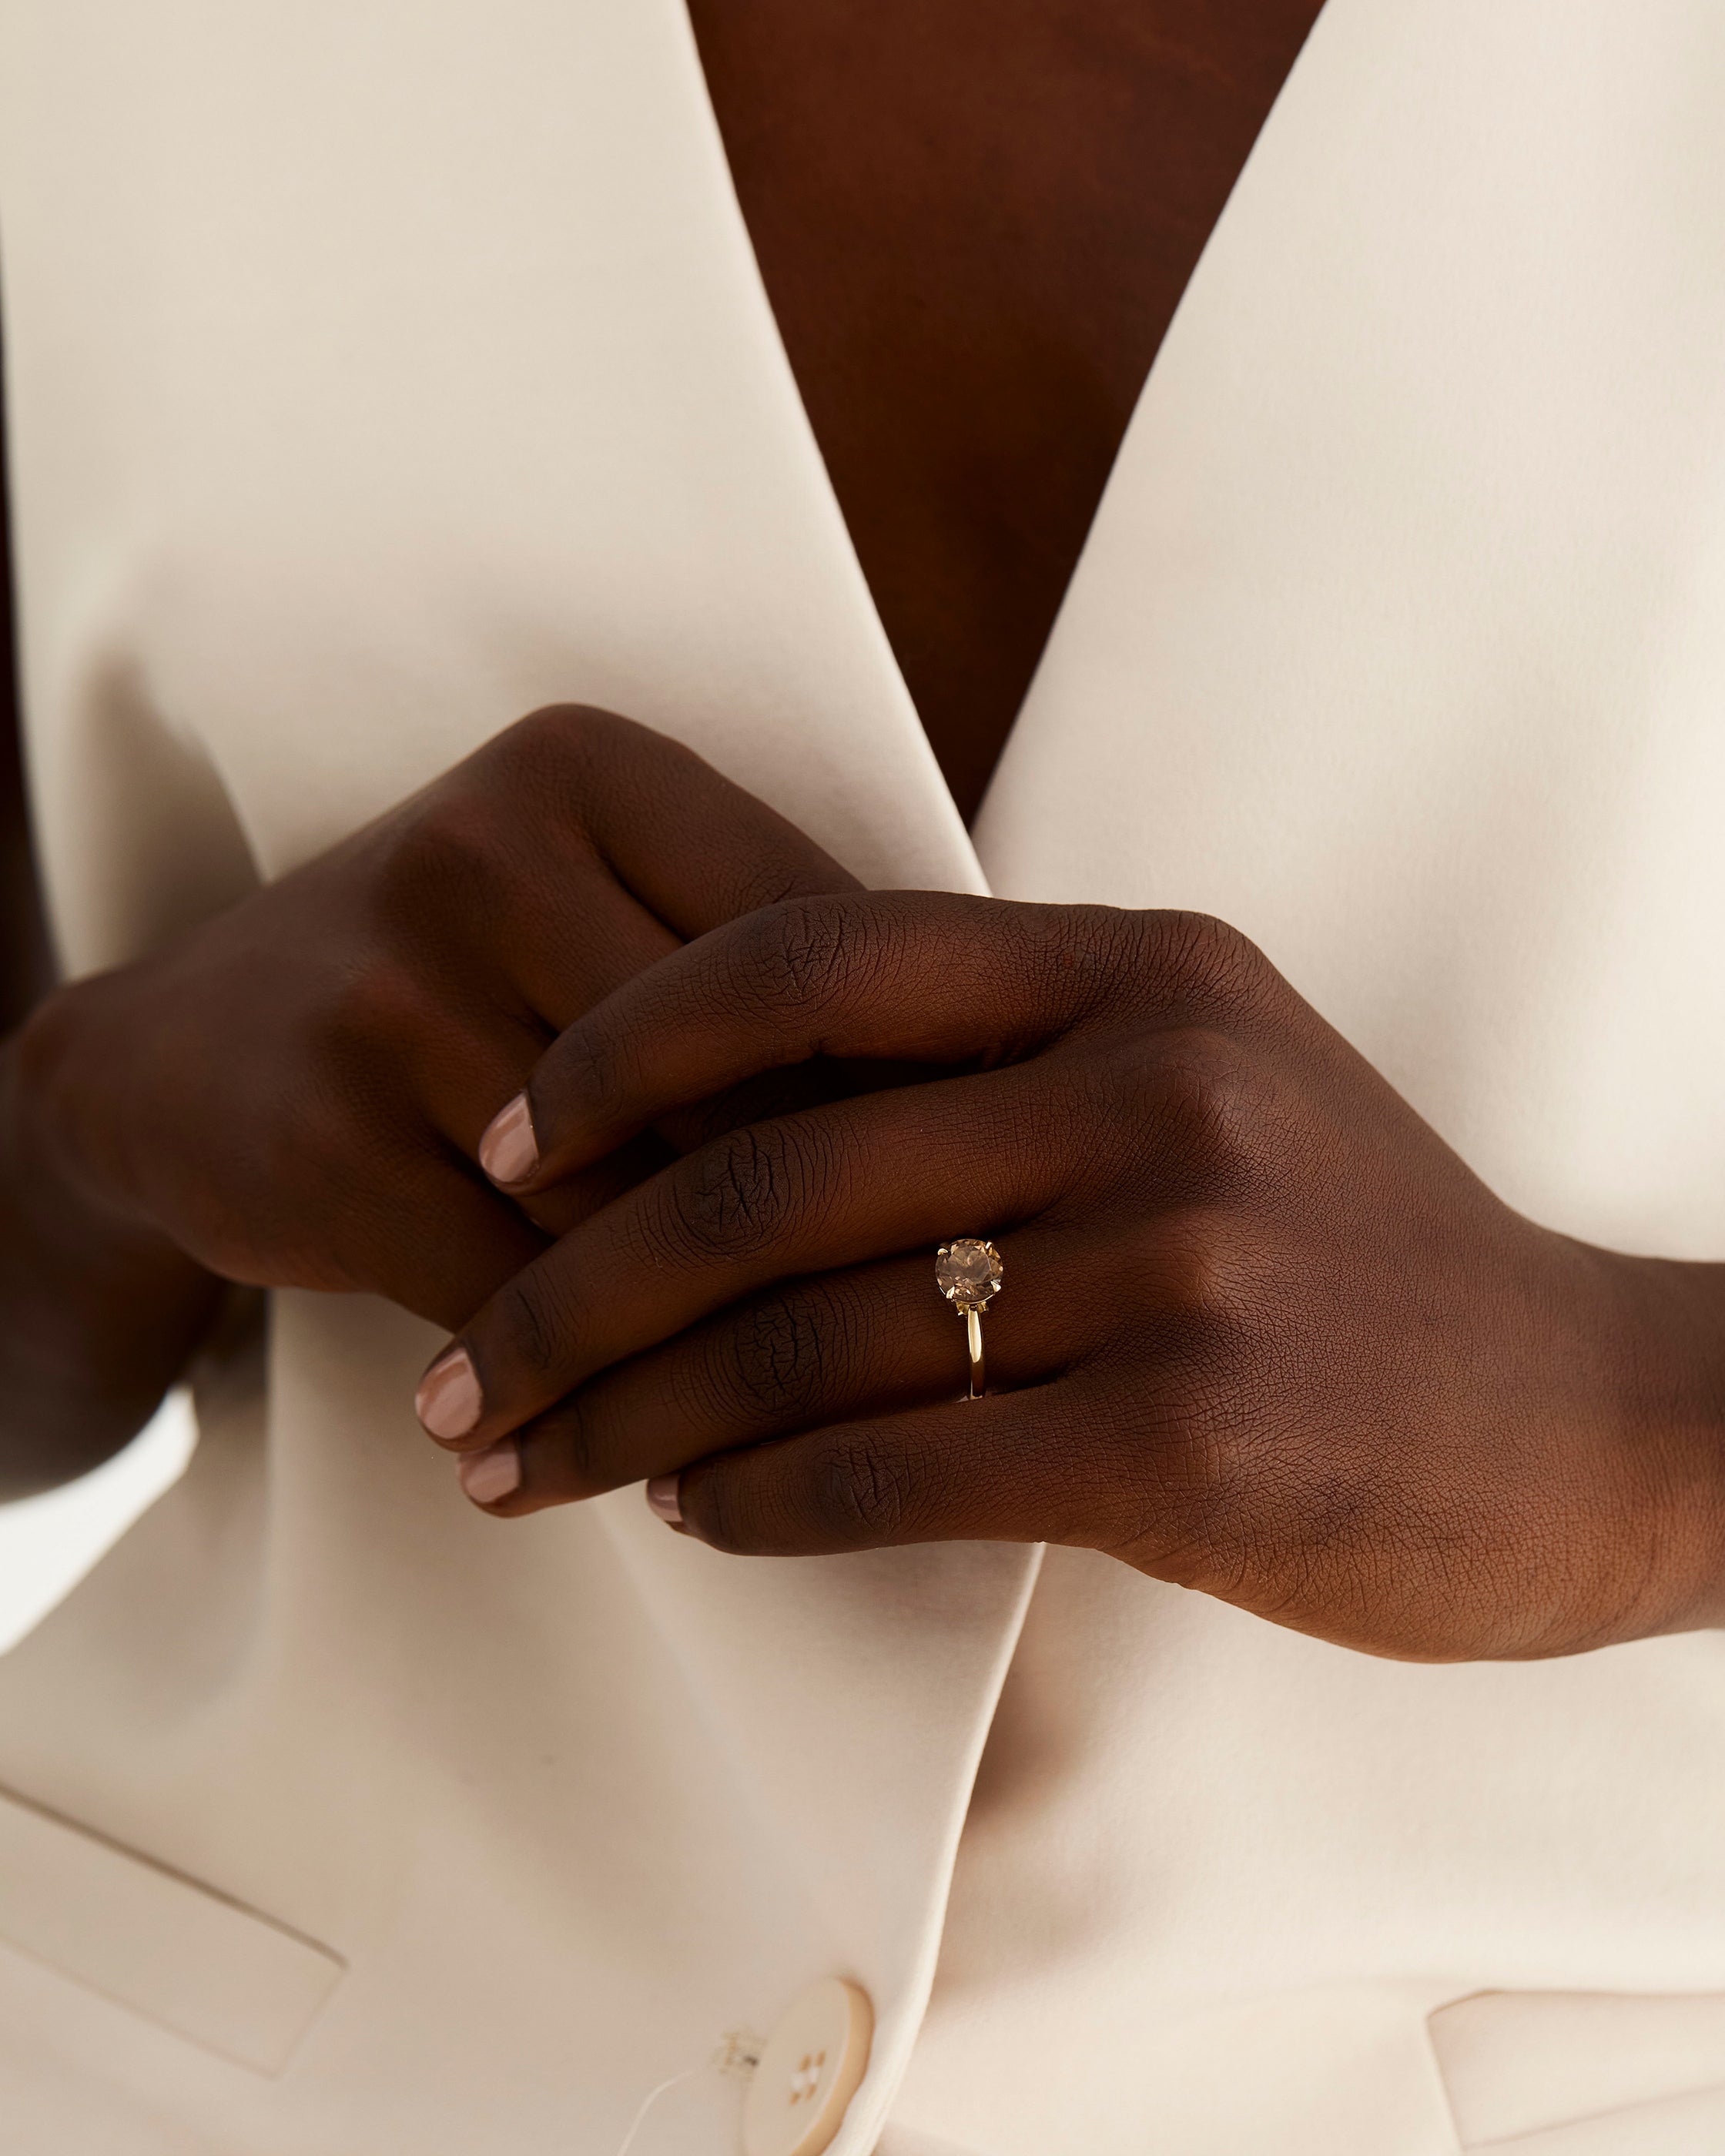 A model wears a round solitaire with a smokey quartz and diamond details in the setting